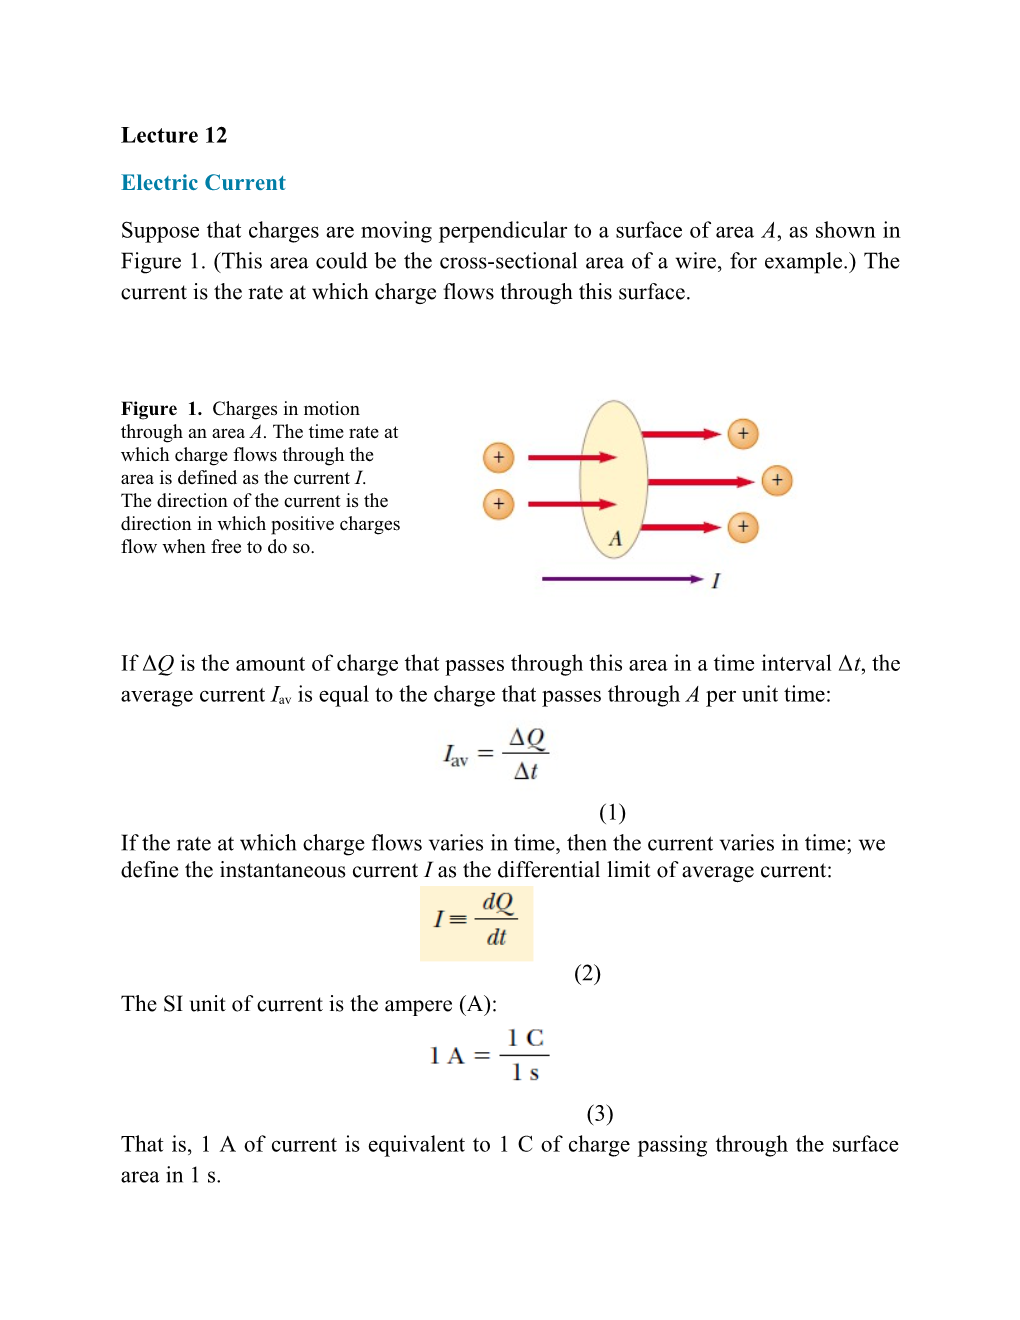 Electric Current s1